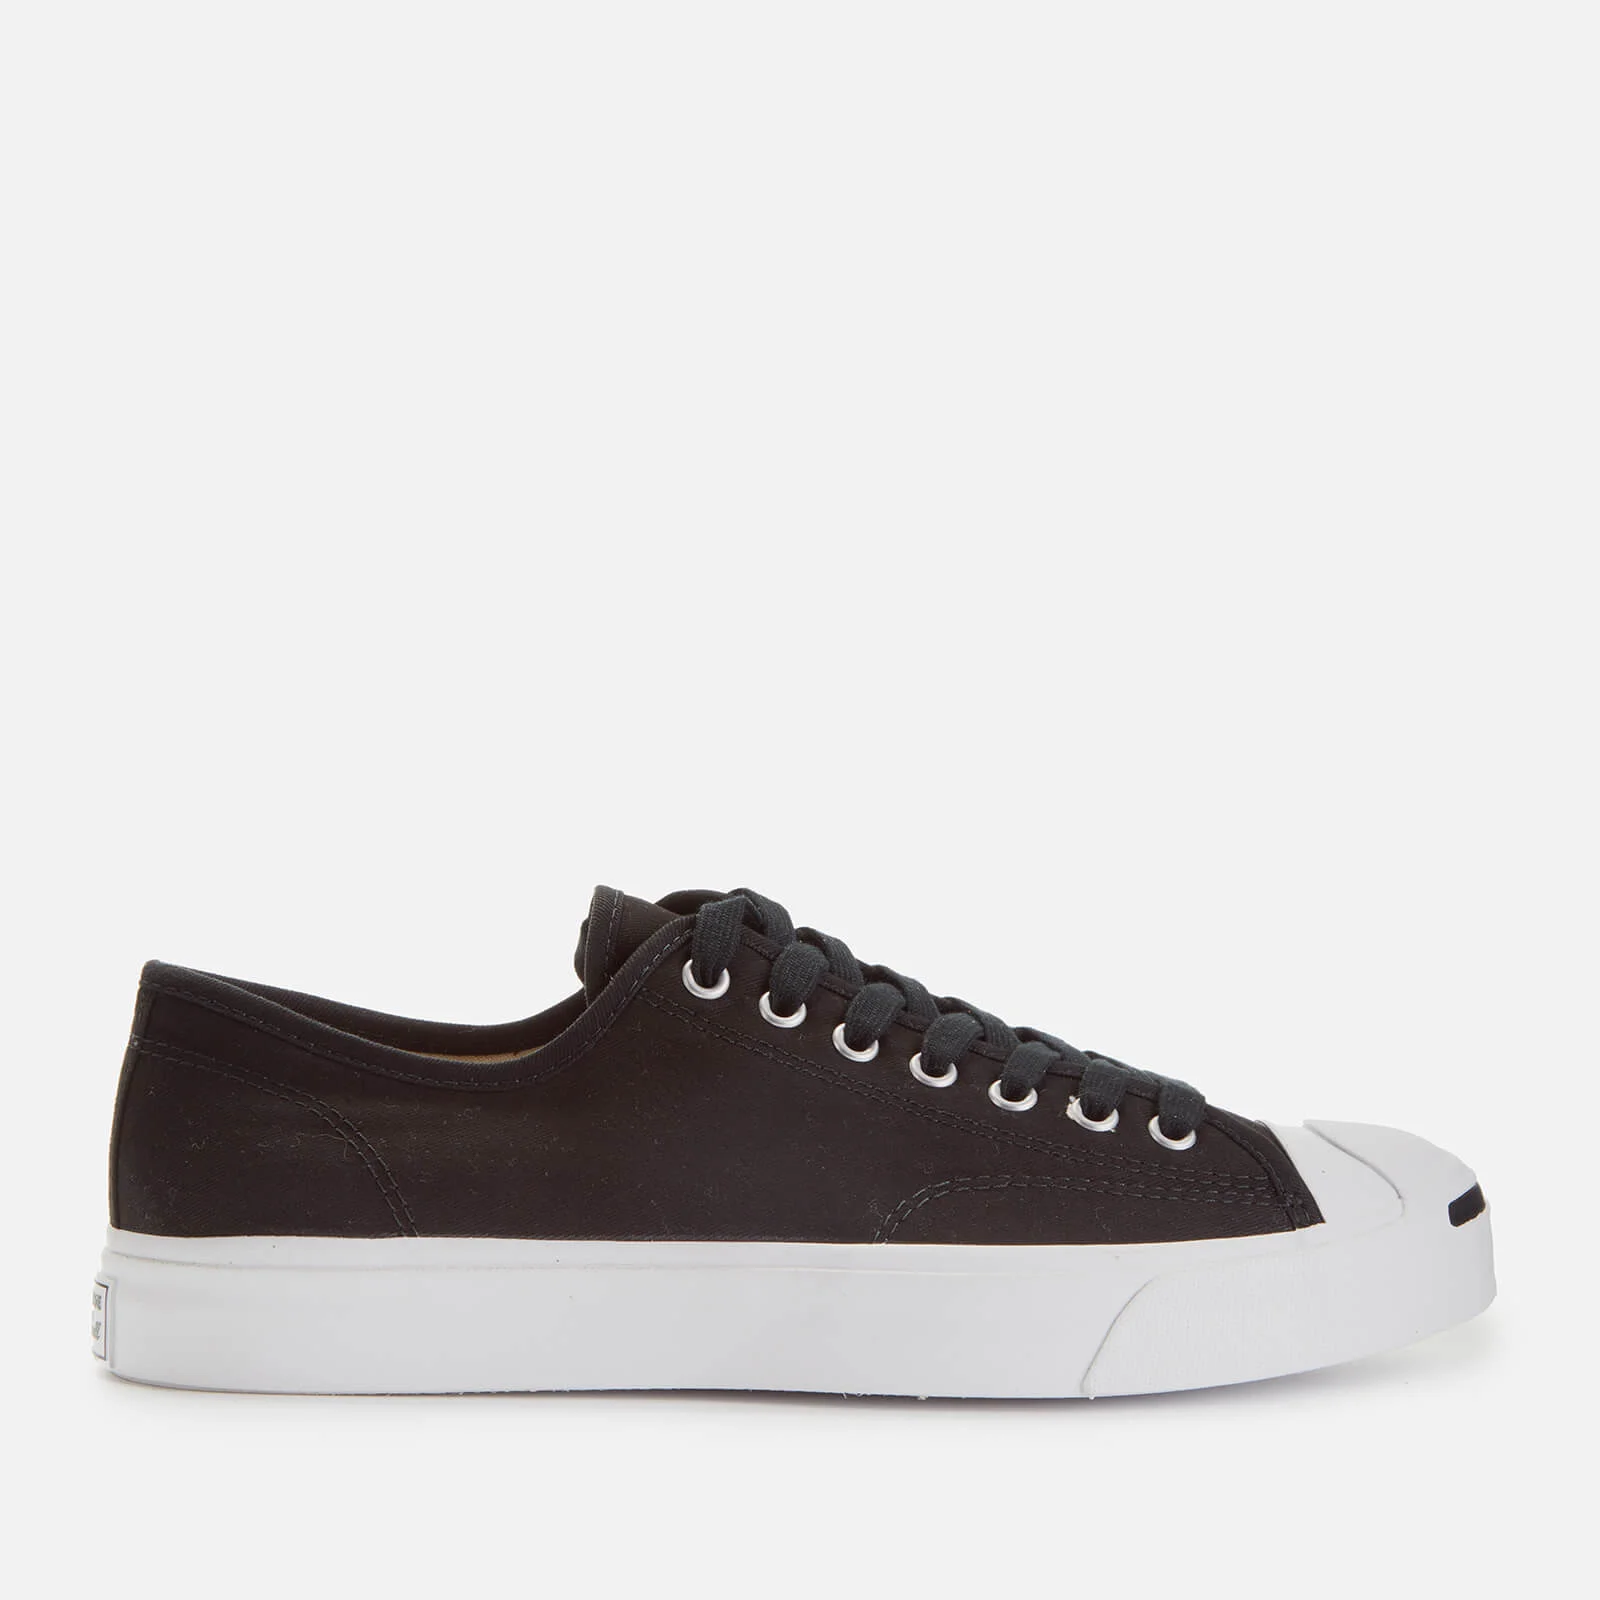 Converse Men's Jack Purcell Ox Trainers - Black/White/Black Image 1